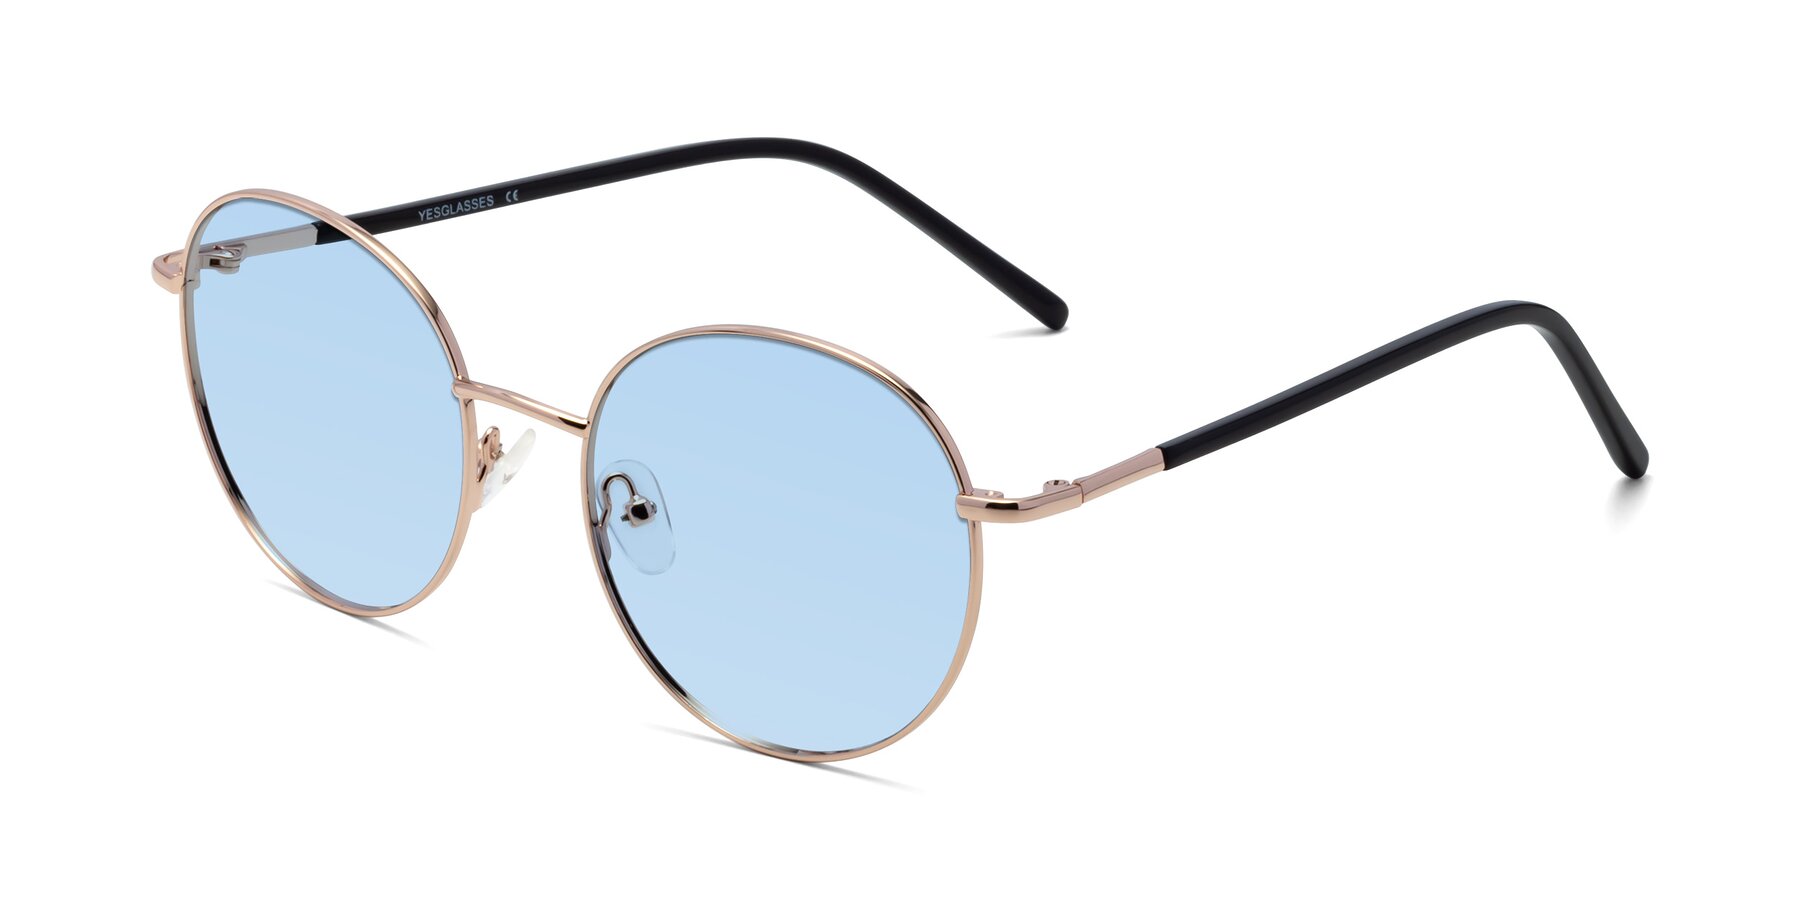 Angle of Cosmos in Rose Gold with Light Blue Tinted Lenses